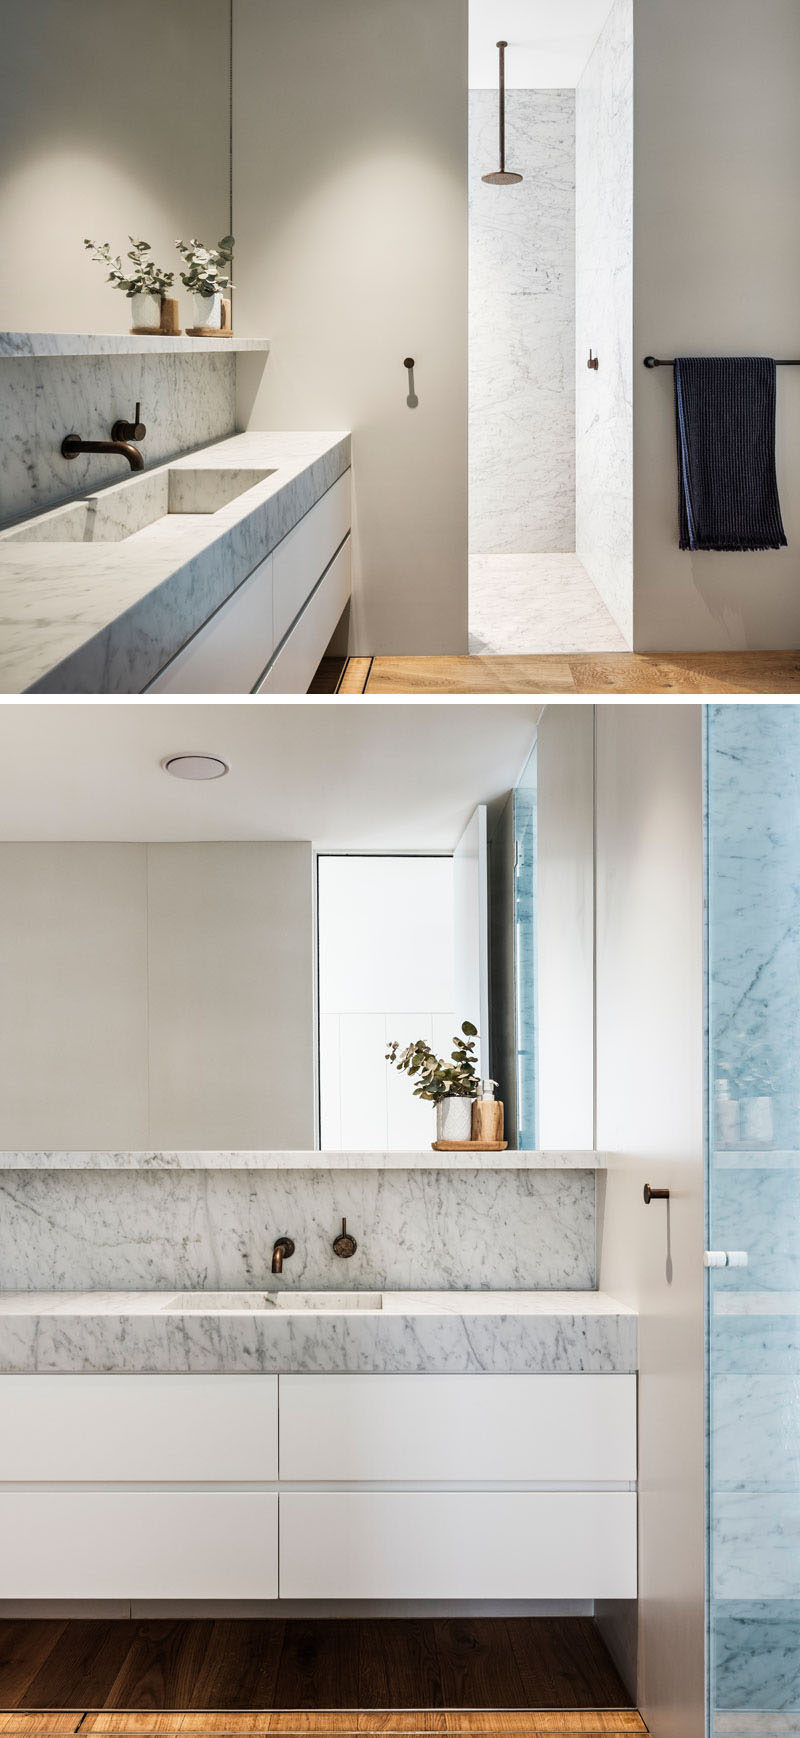 In this modern bathroom, a light grey stone countertop sits on a white vanity, and a walk-in shower has a simple rainfall shower head. #ModernBathroom #BathroomDesign